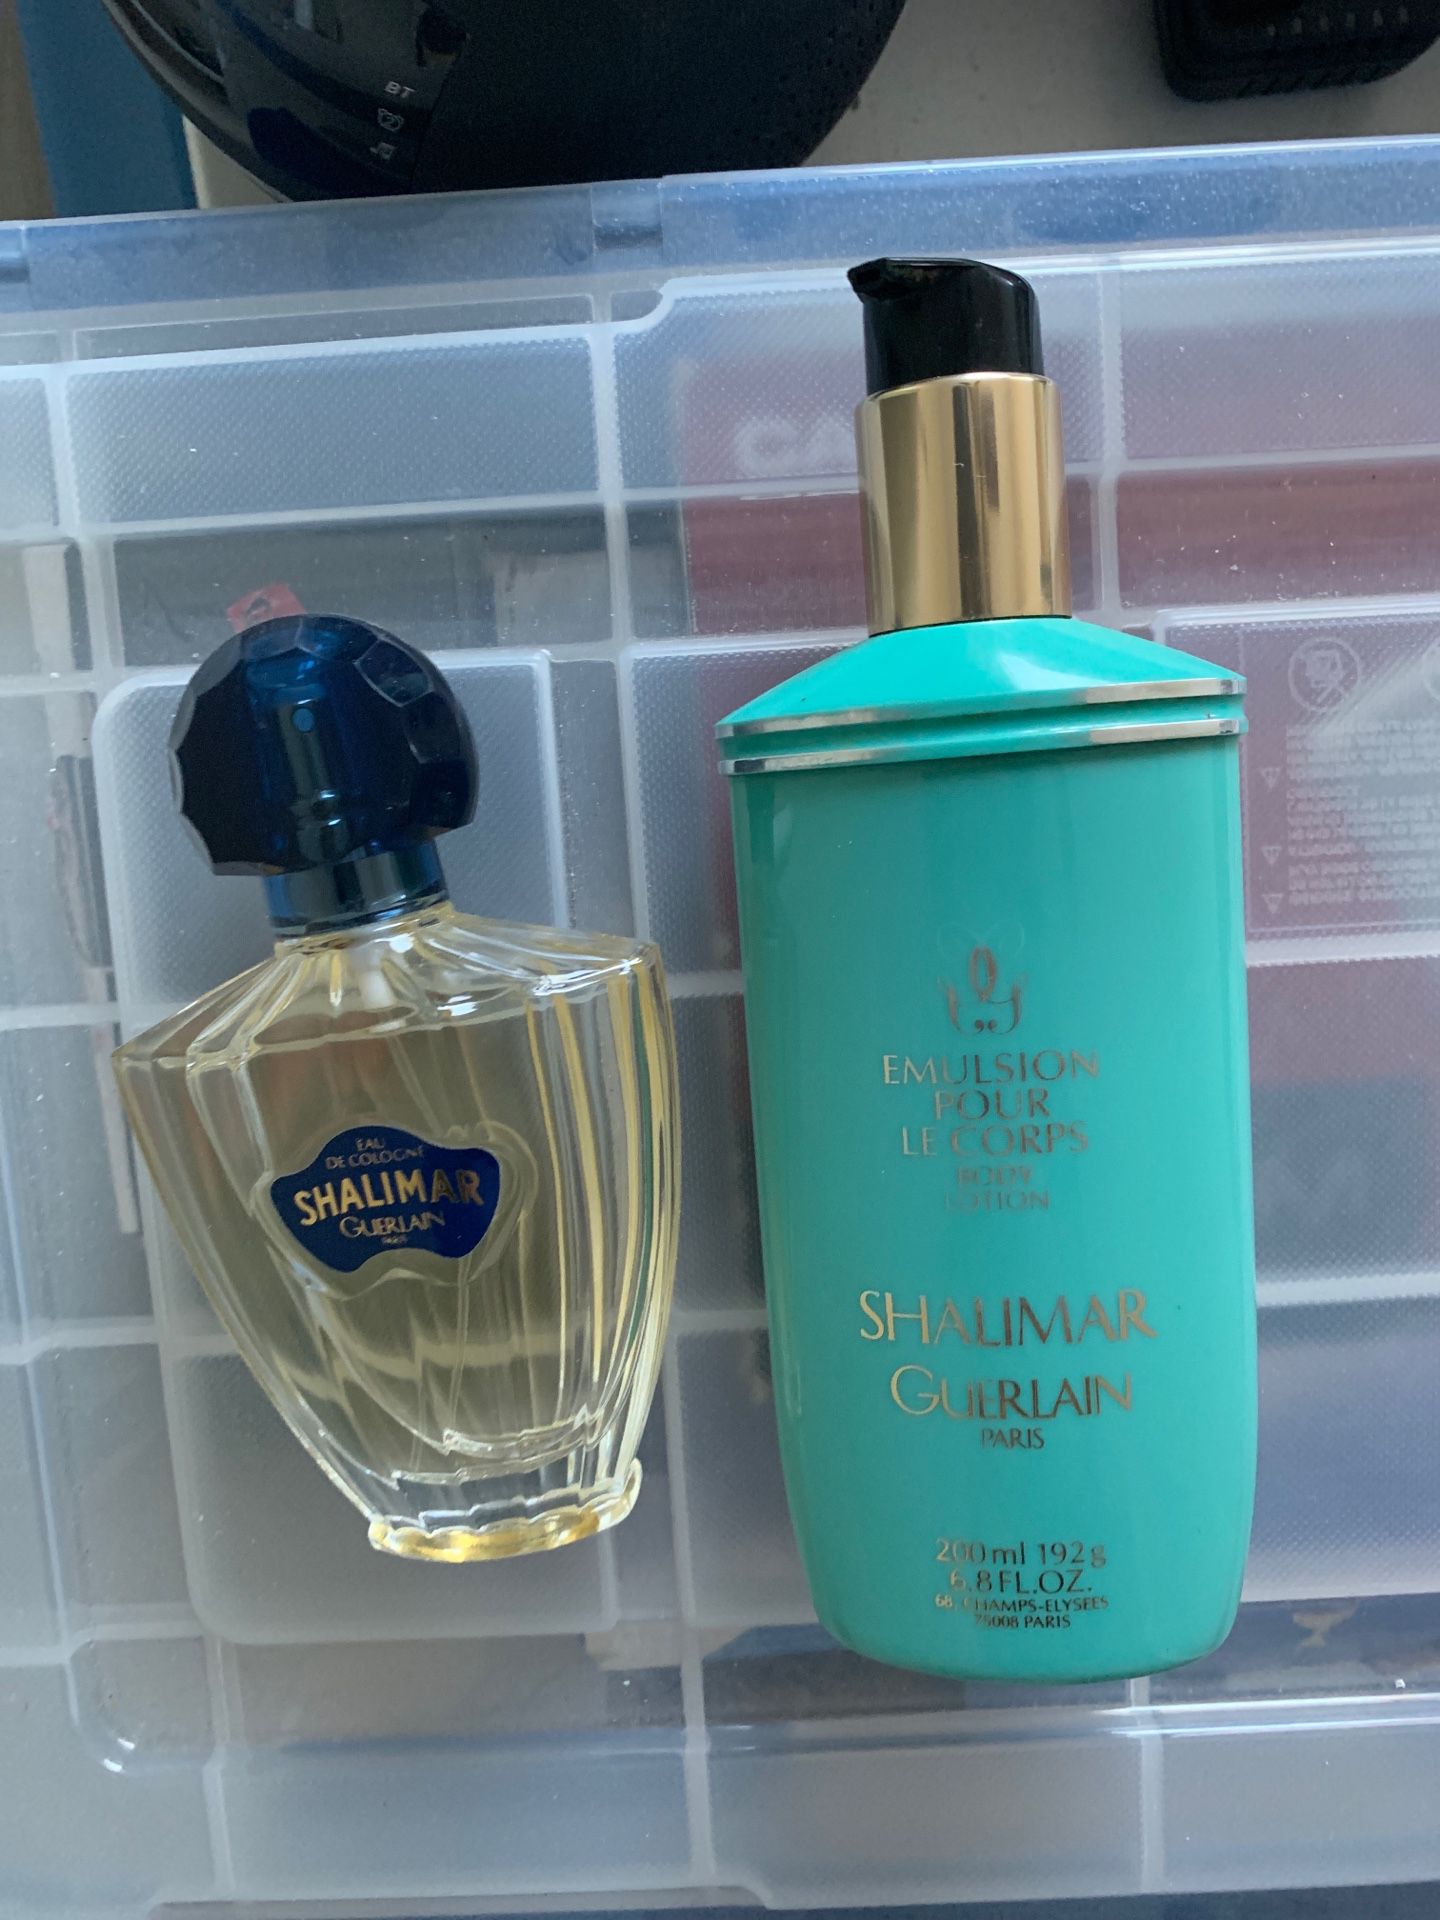 FREE Perfume and lotion